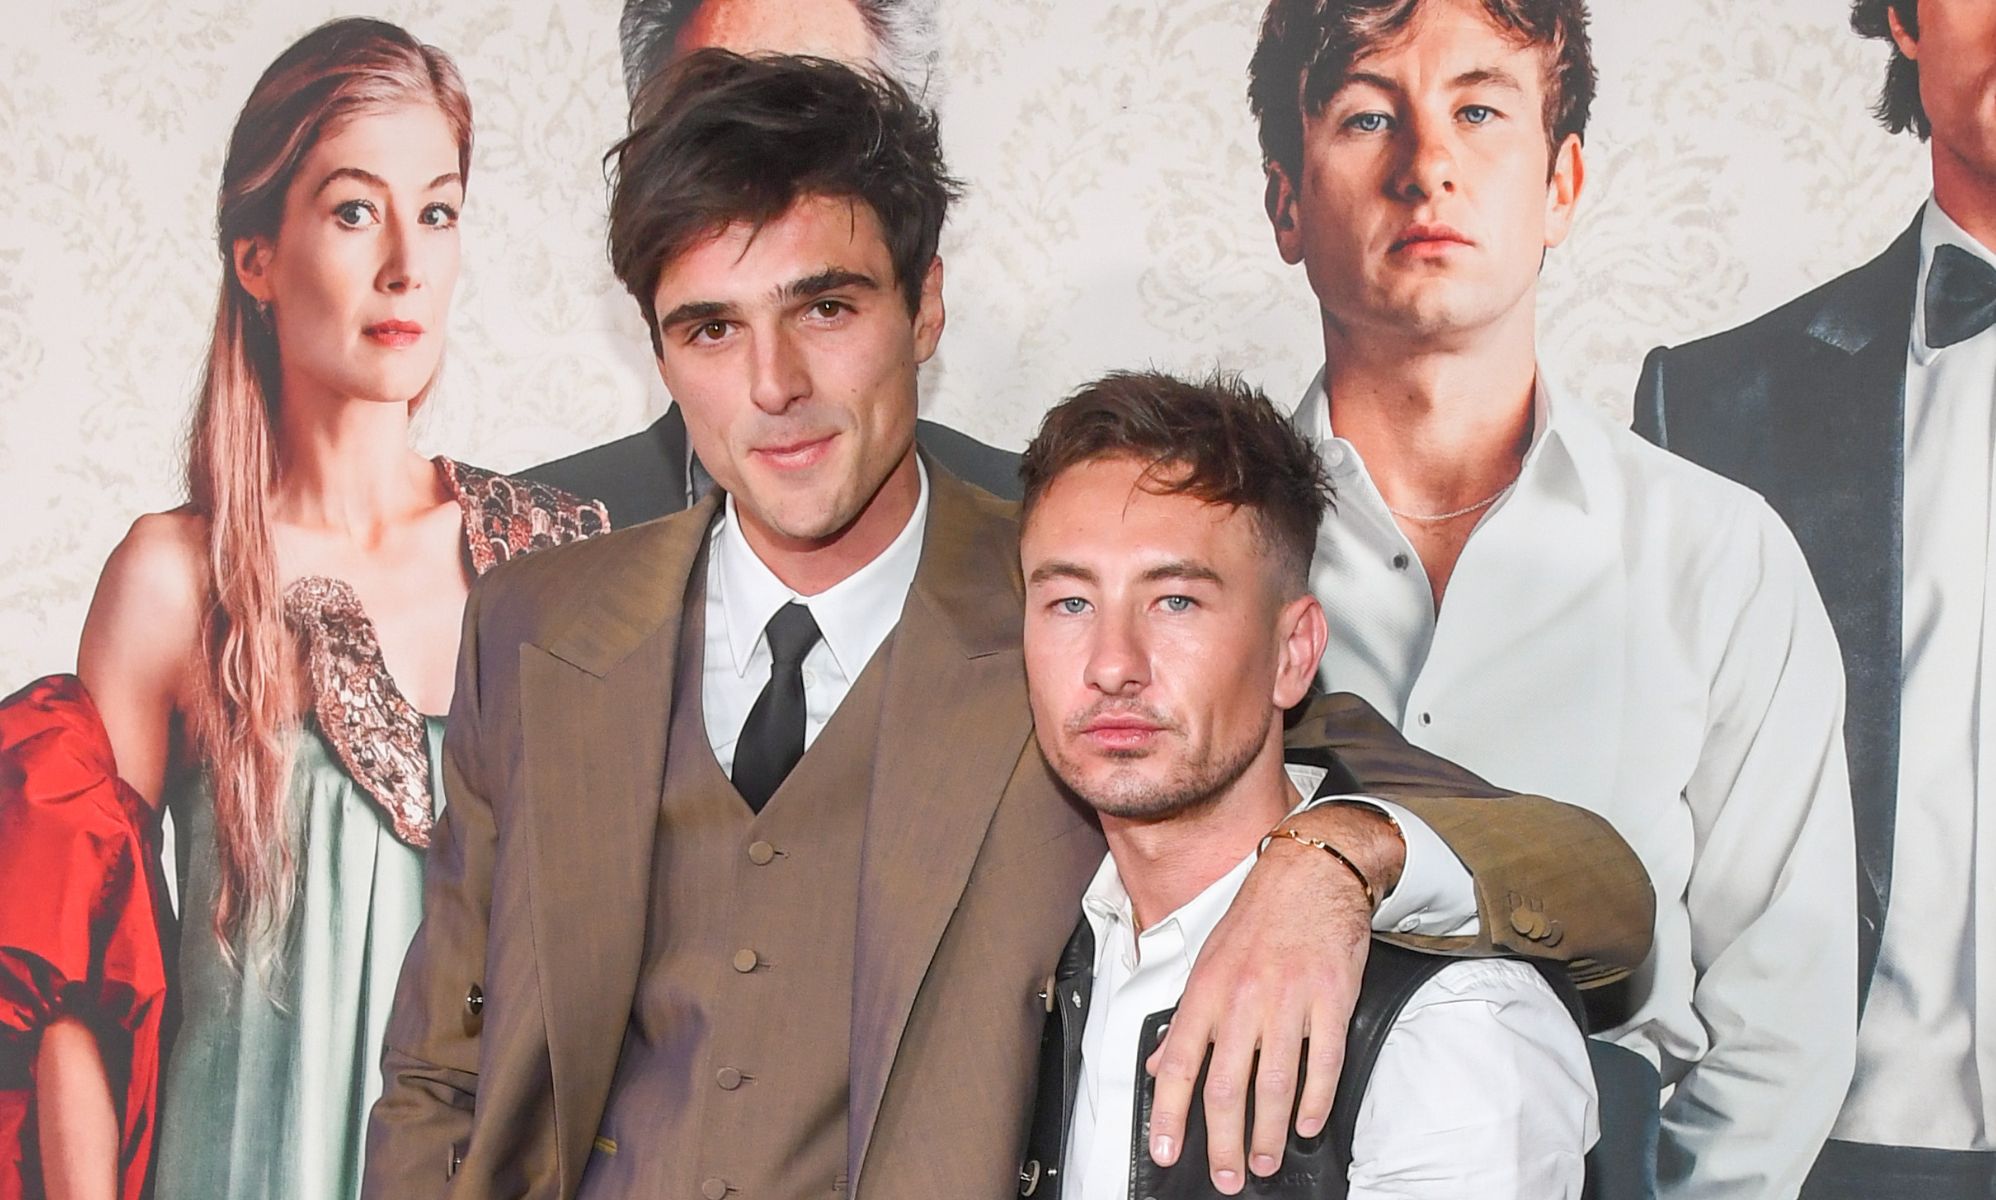 Saltburn's Jacob Elordi and Barry Keoghan lean in for kiss at premiere